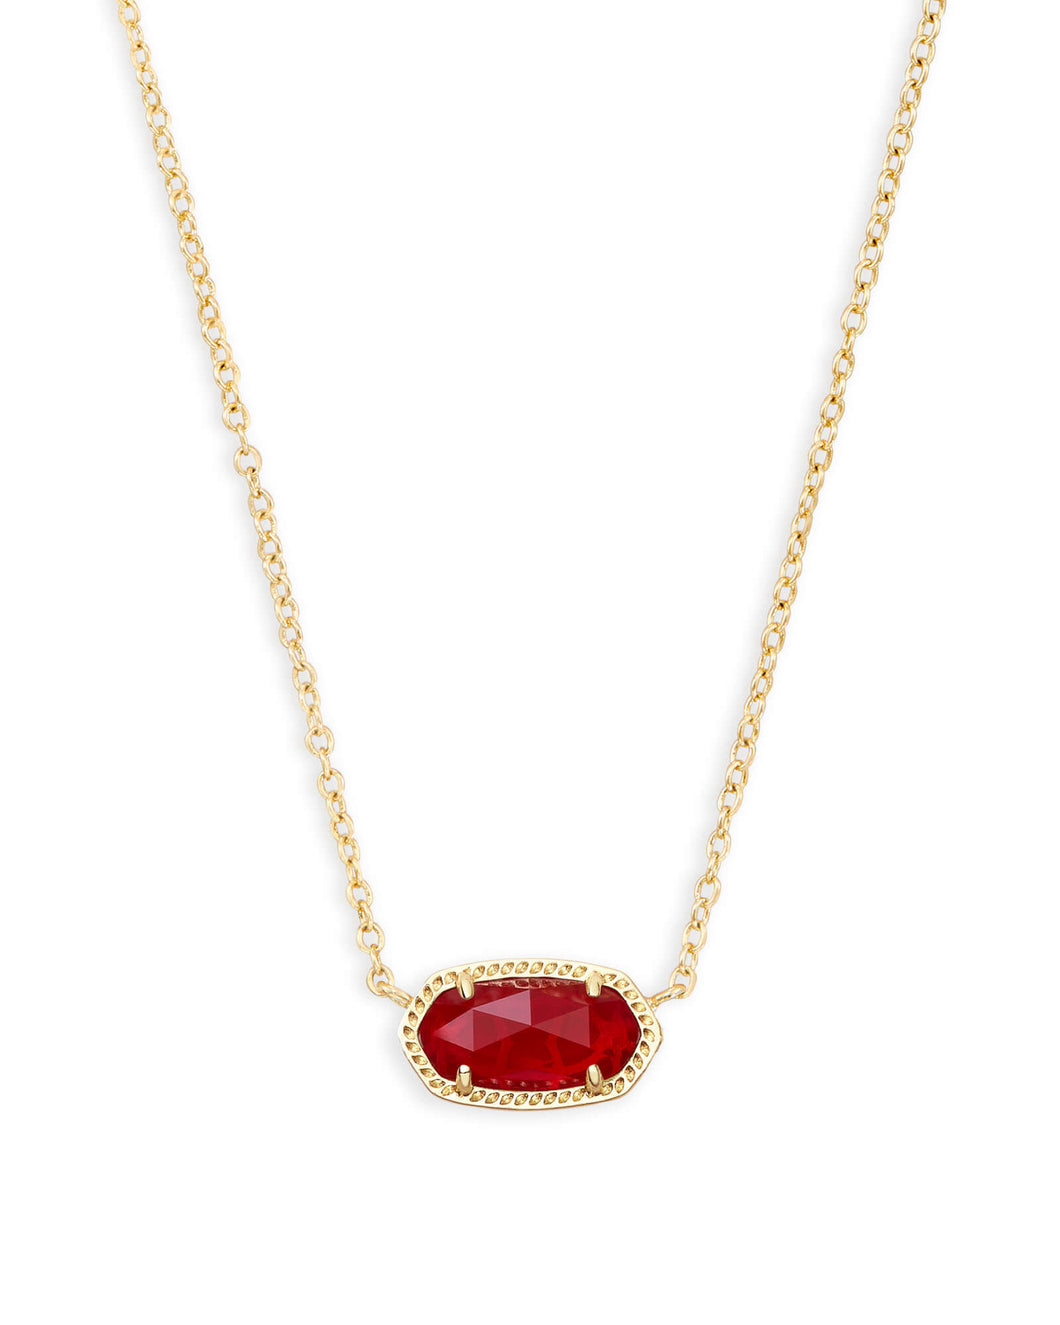 Elisa Necklace in GD Red